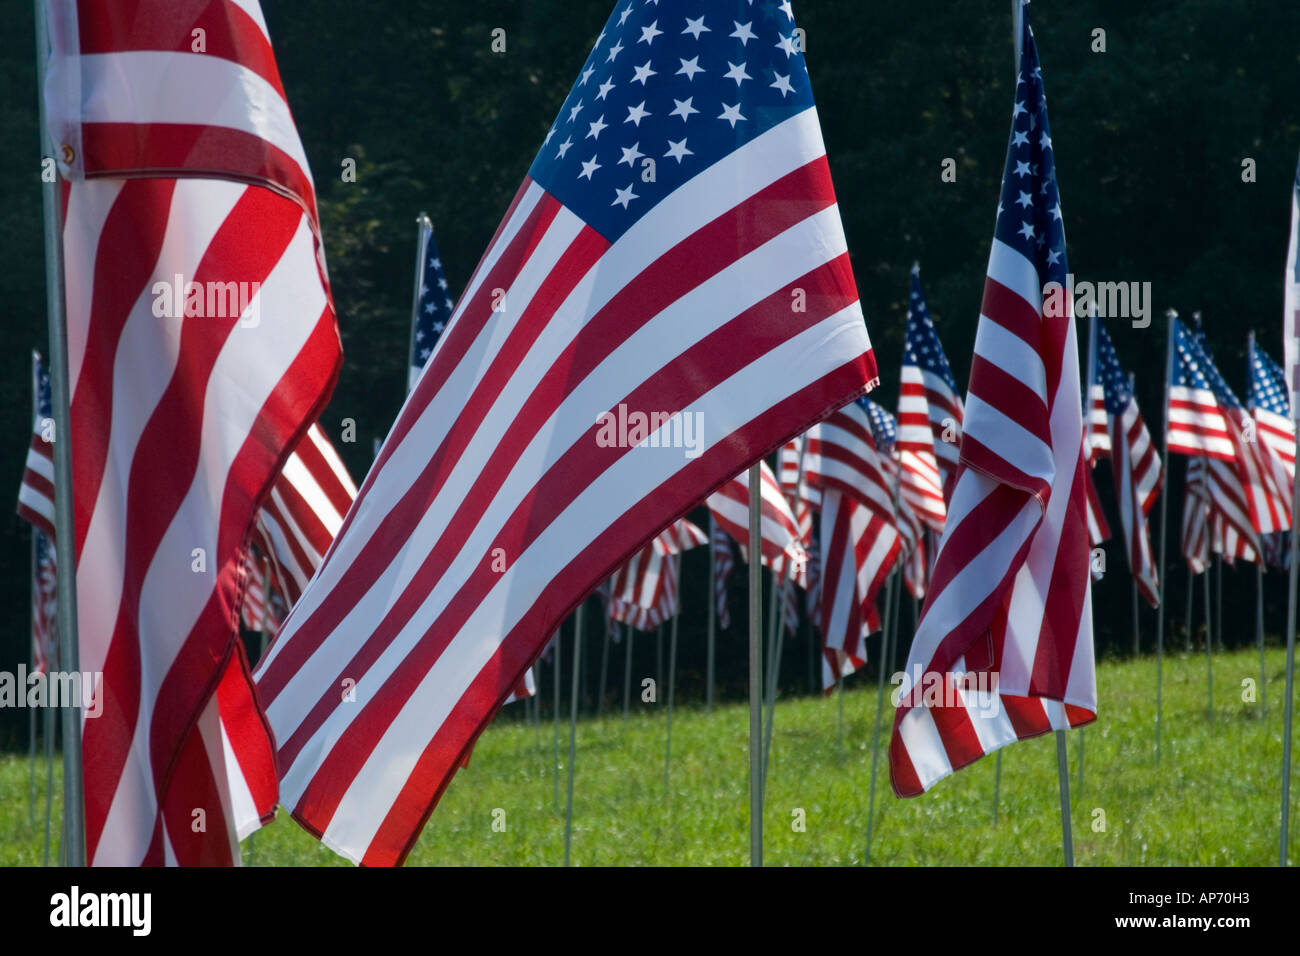 Flags flying in honor of the 9 11 2001 victims of the terrorist attack on the United States.  Located in Kennesaw, Georgia, USA Stock Photo